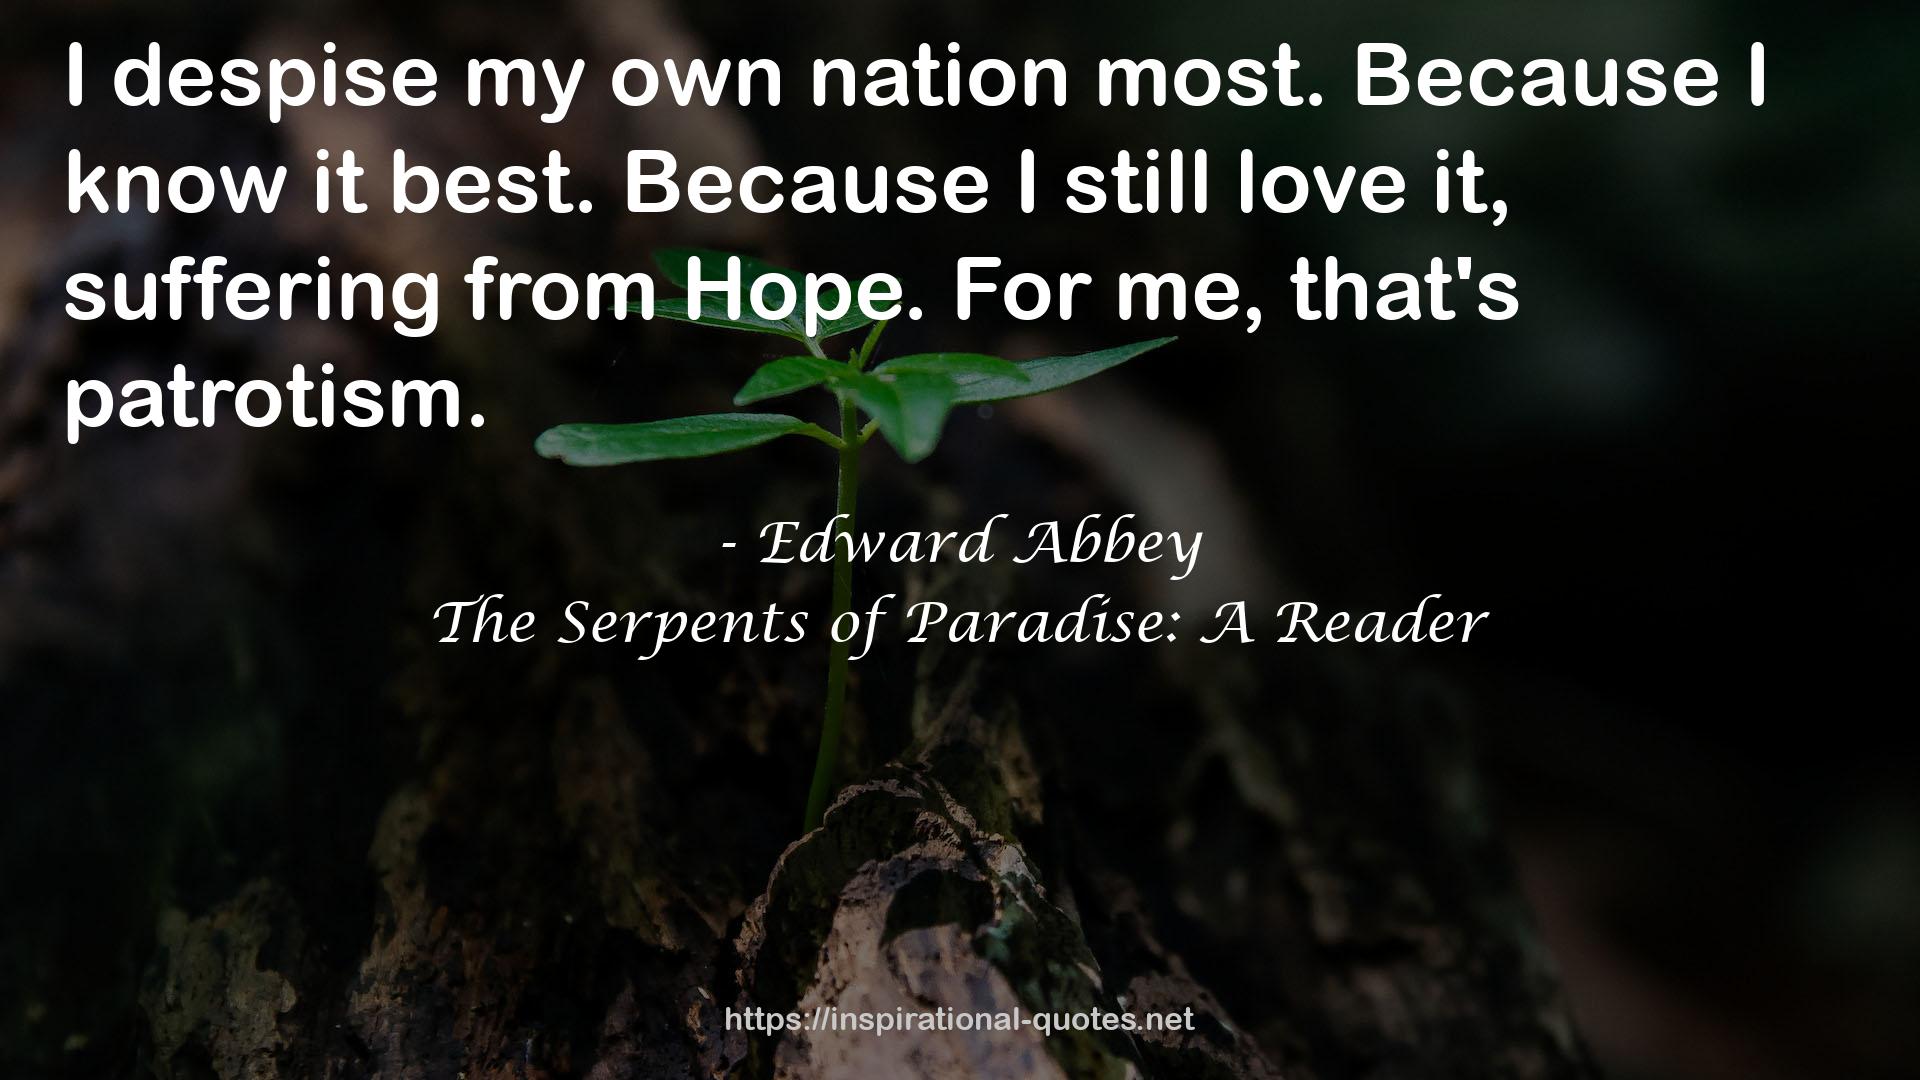 The Serpents of Paradise: A Reader QUOTES